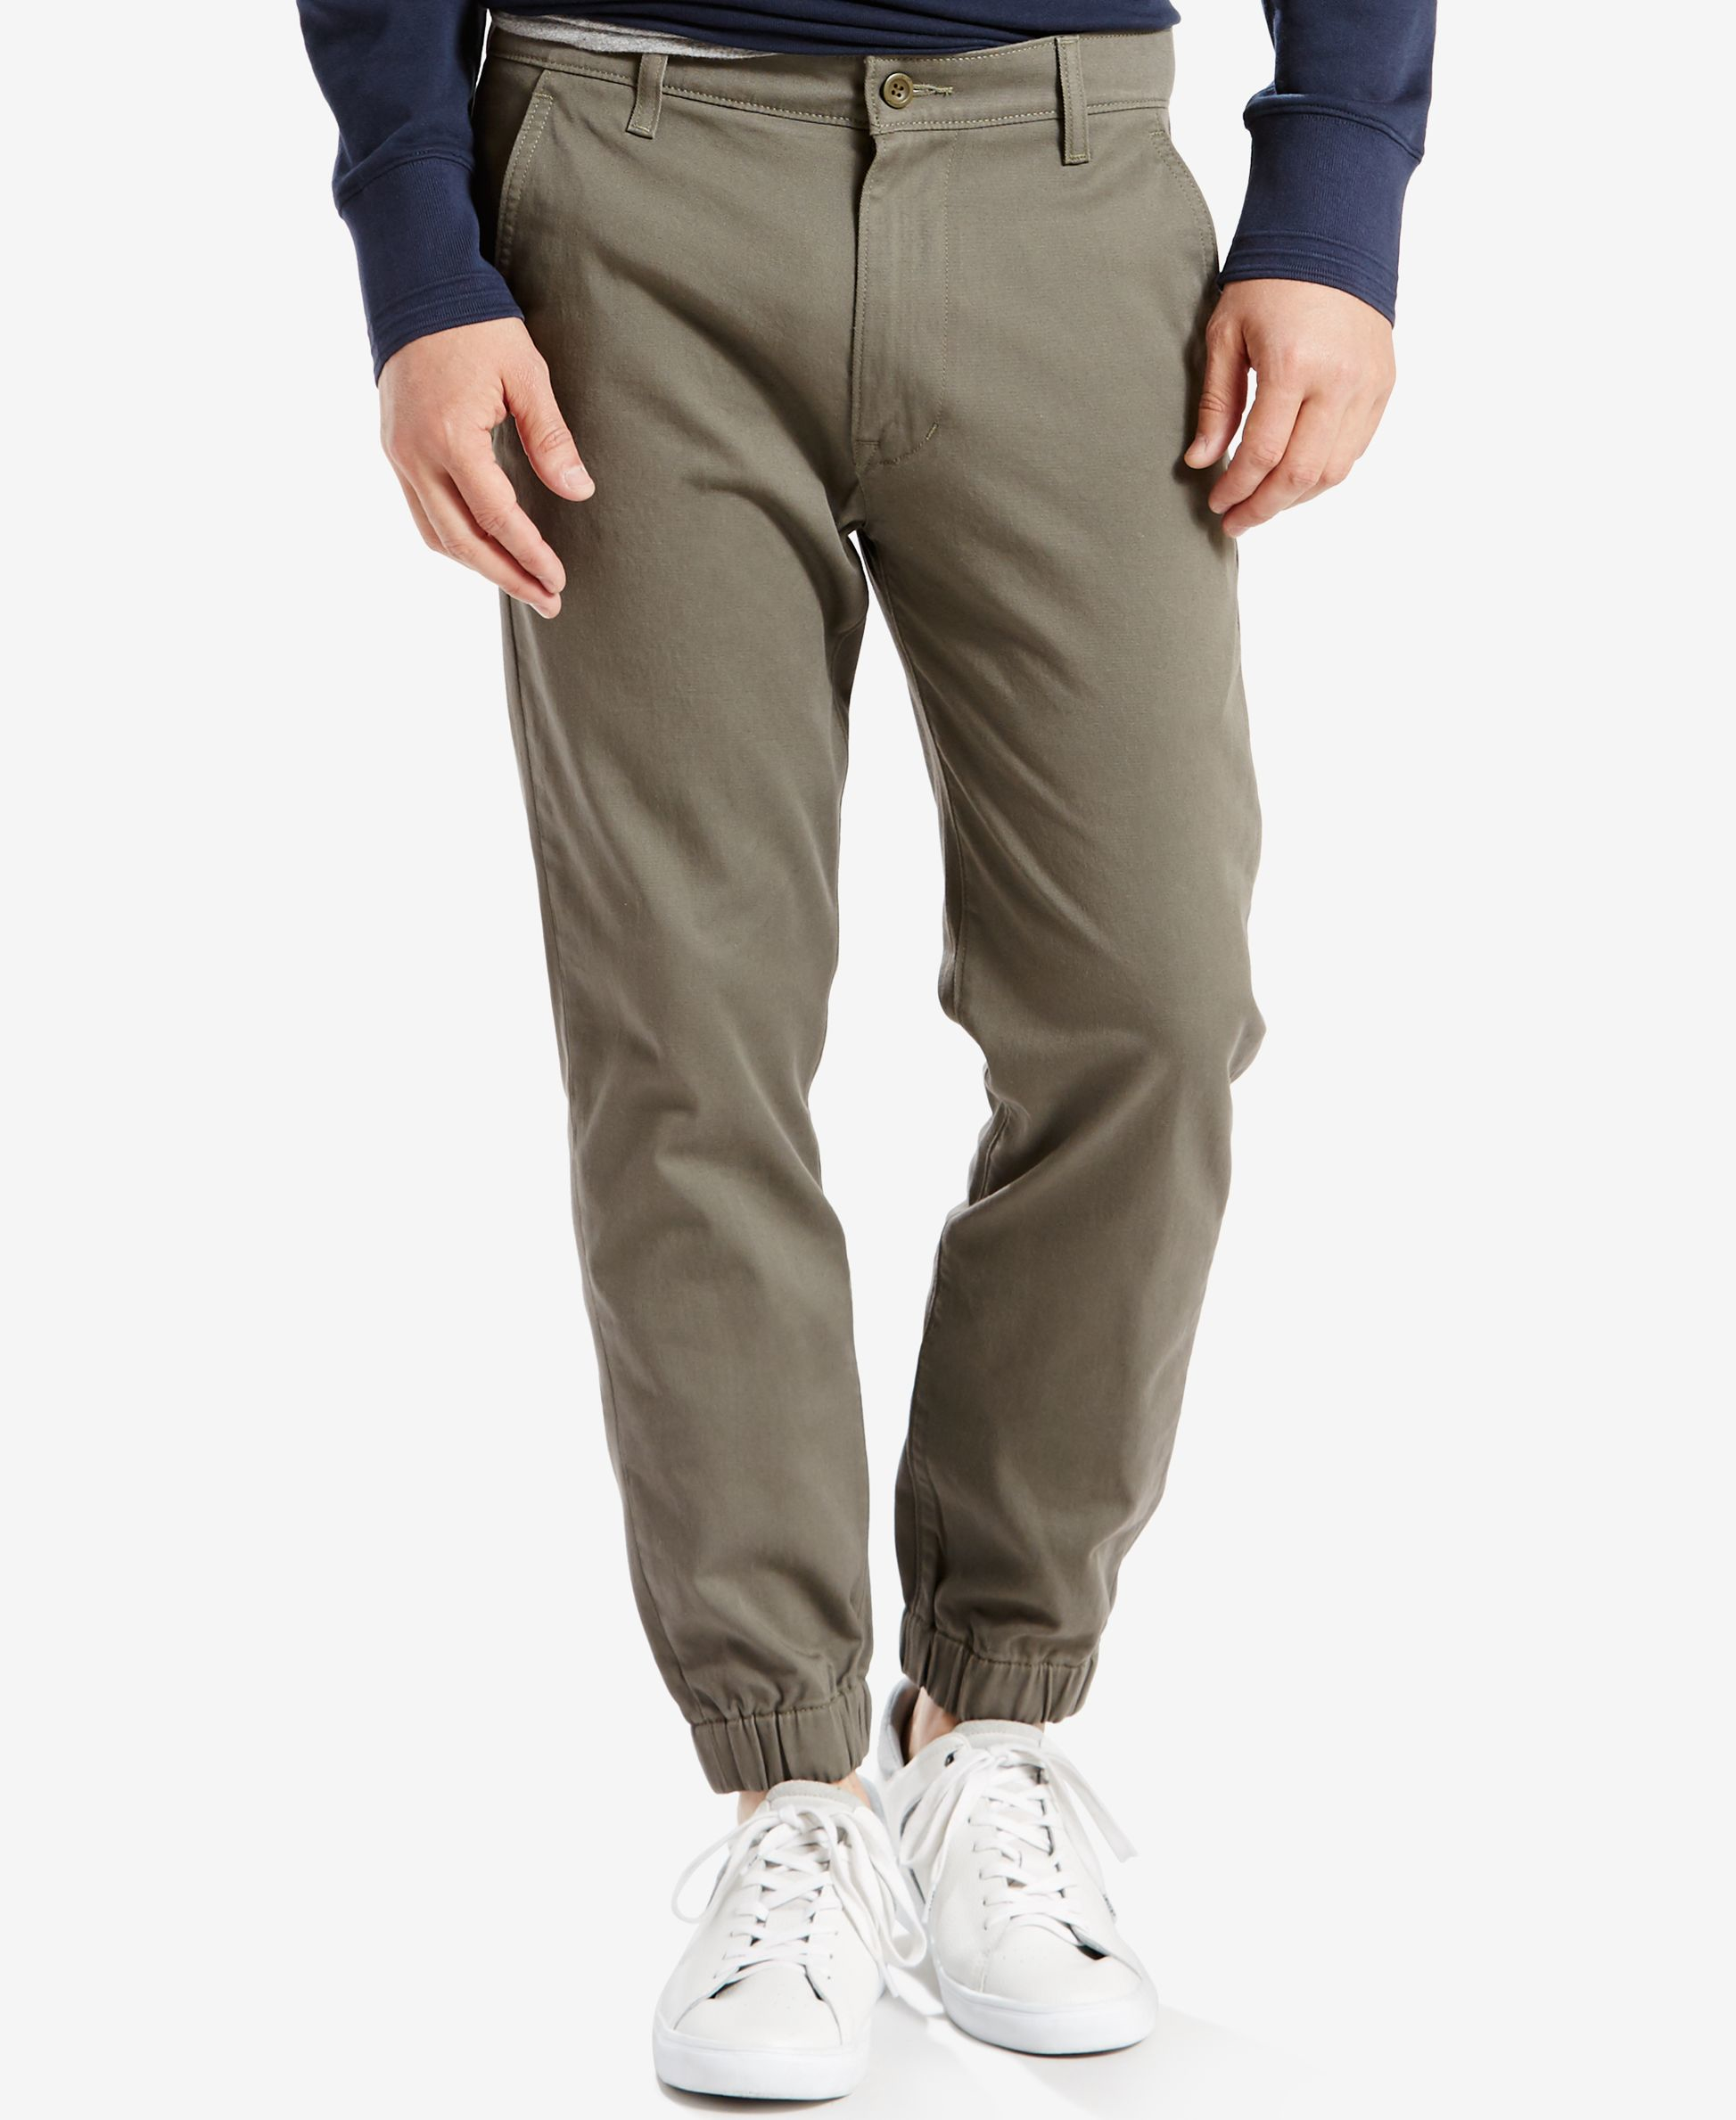 Levi's Cotton Men's Chino Jogger Pants in Dusty Green (Green) for Men ...